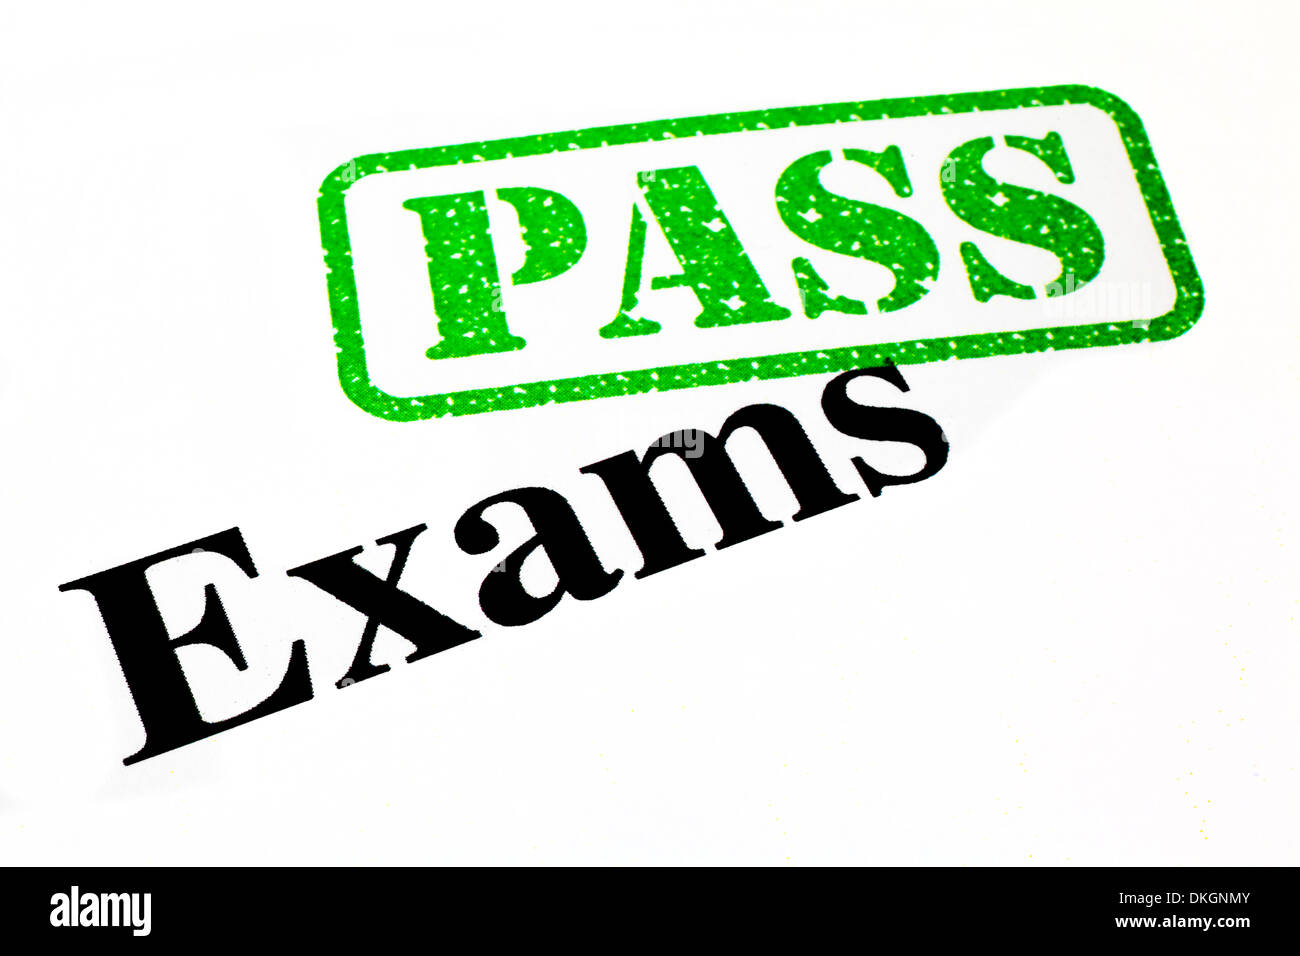 Passed your Exams. Stock Photo